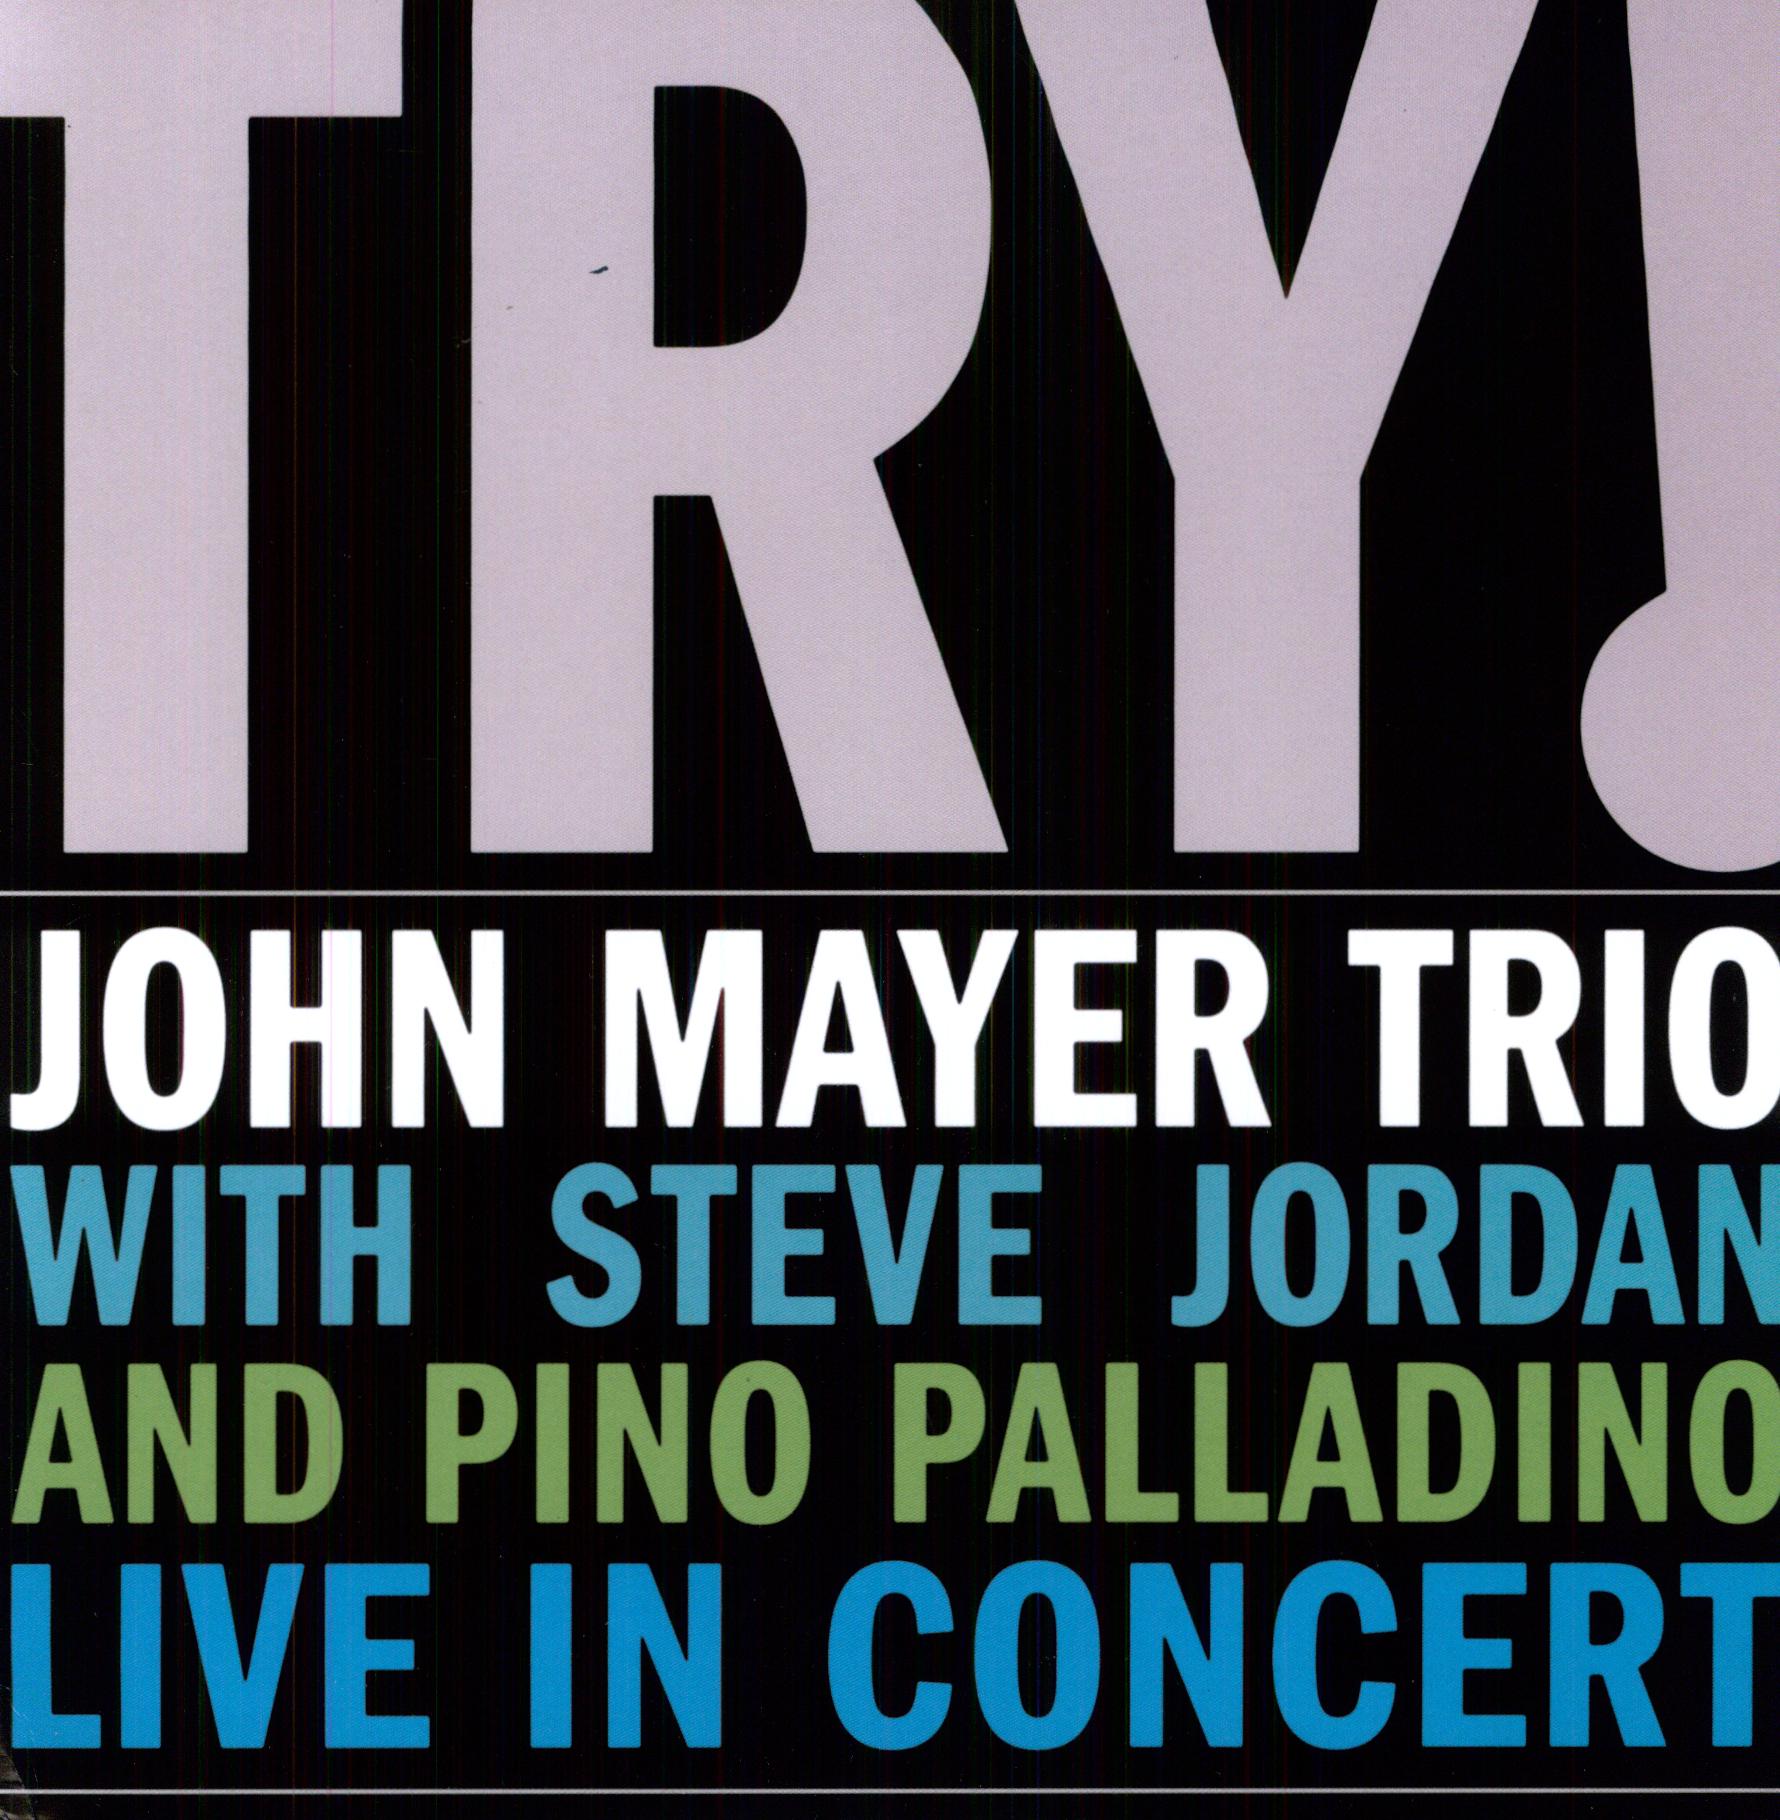 TRY: LIVE IN CONCERT (OGV)